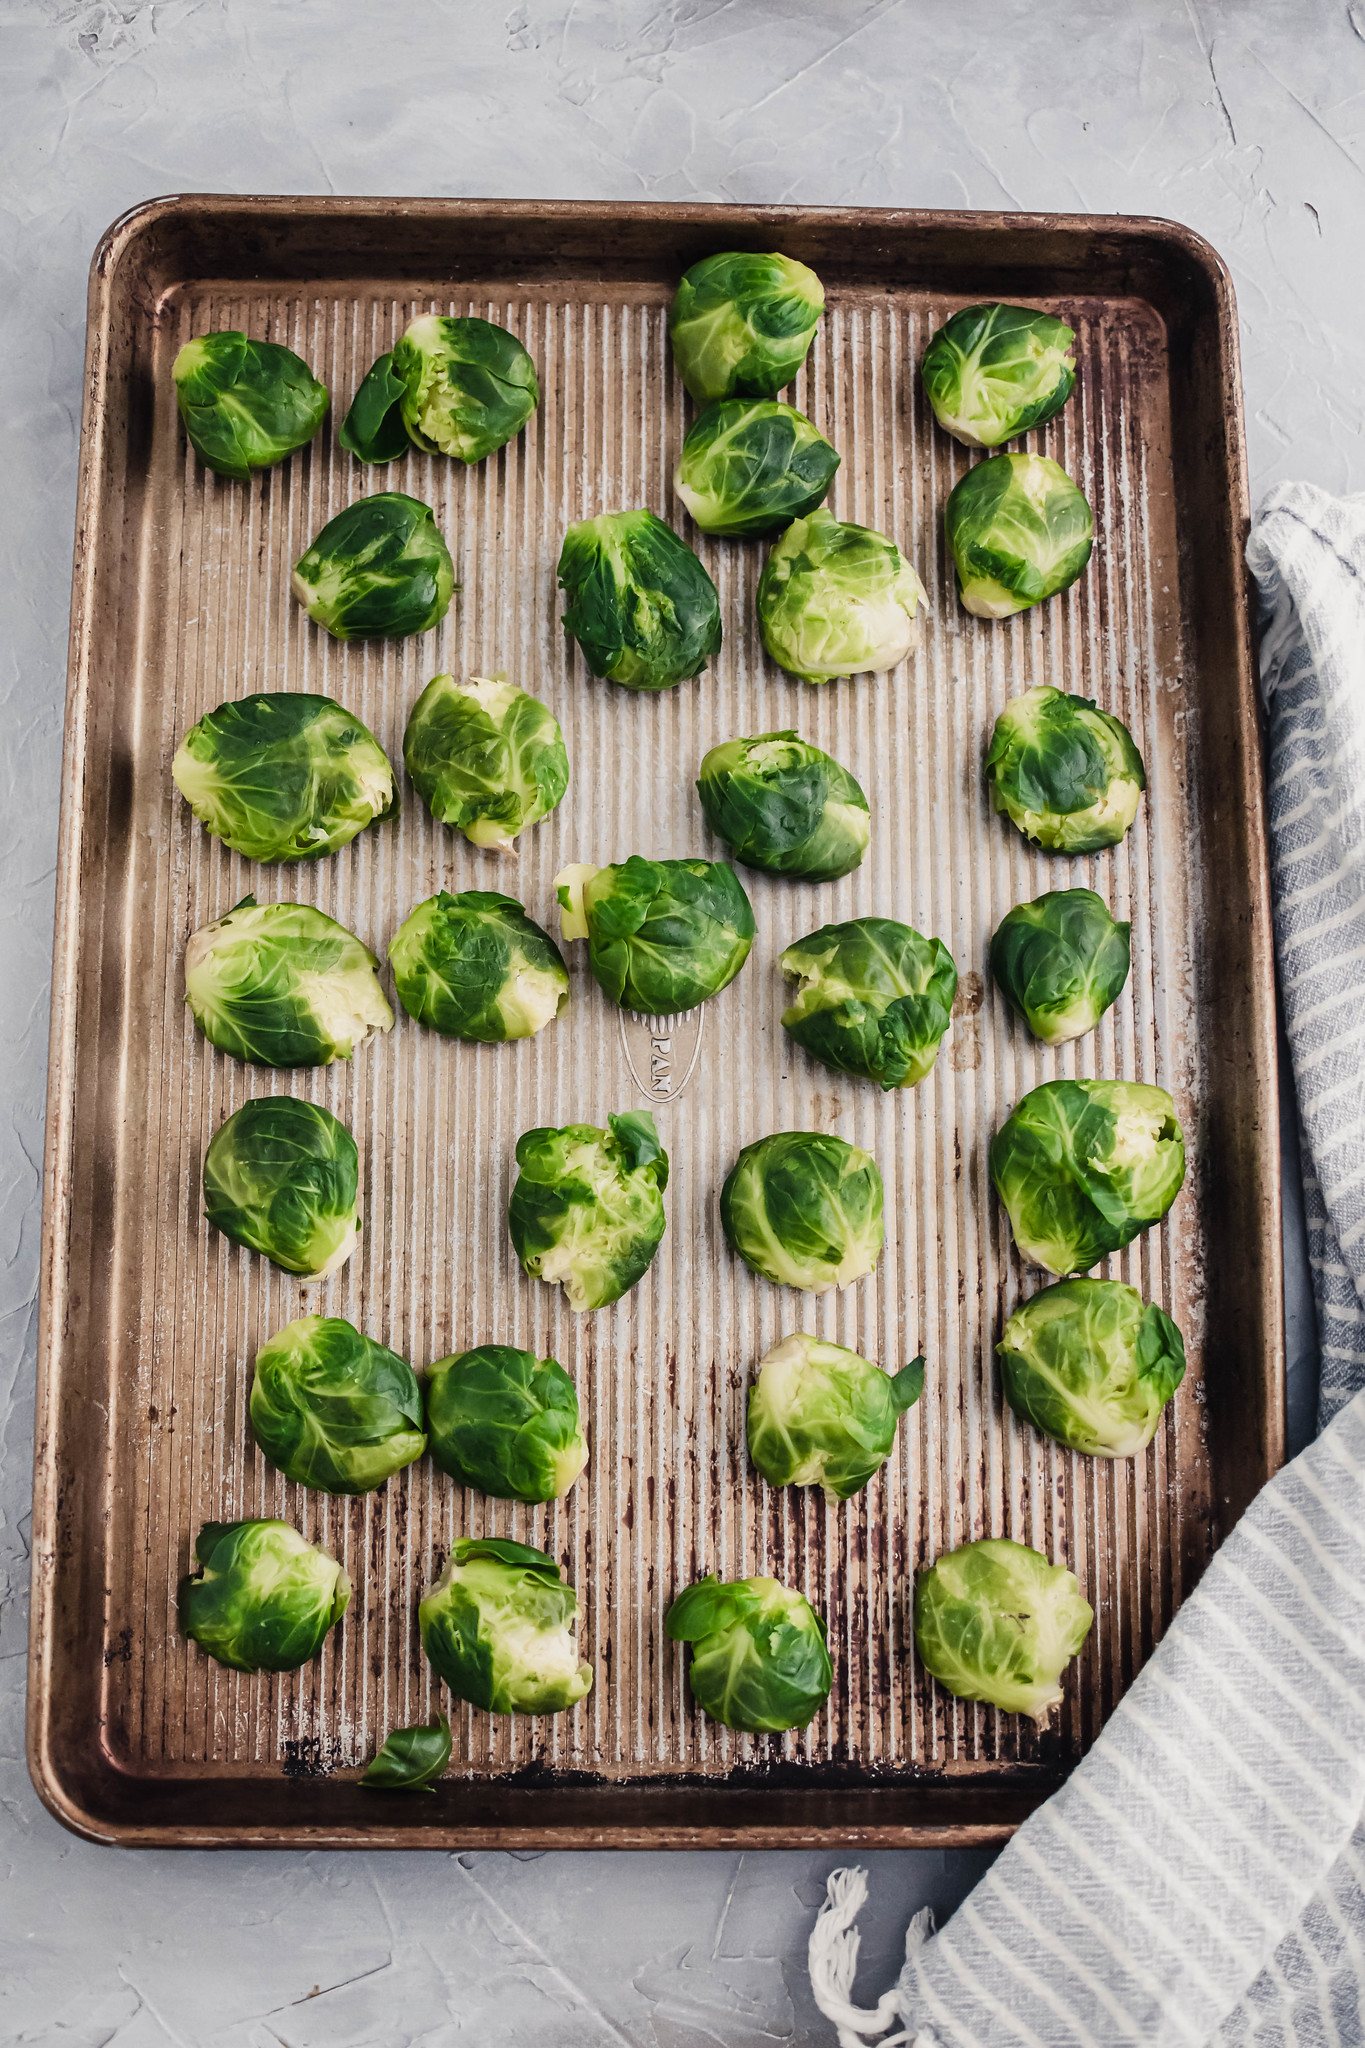 parboiled and smashed brussels sprouts on a baking sheet with a blue and white striped cloth napkin on the right side.